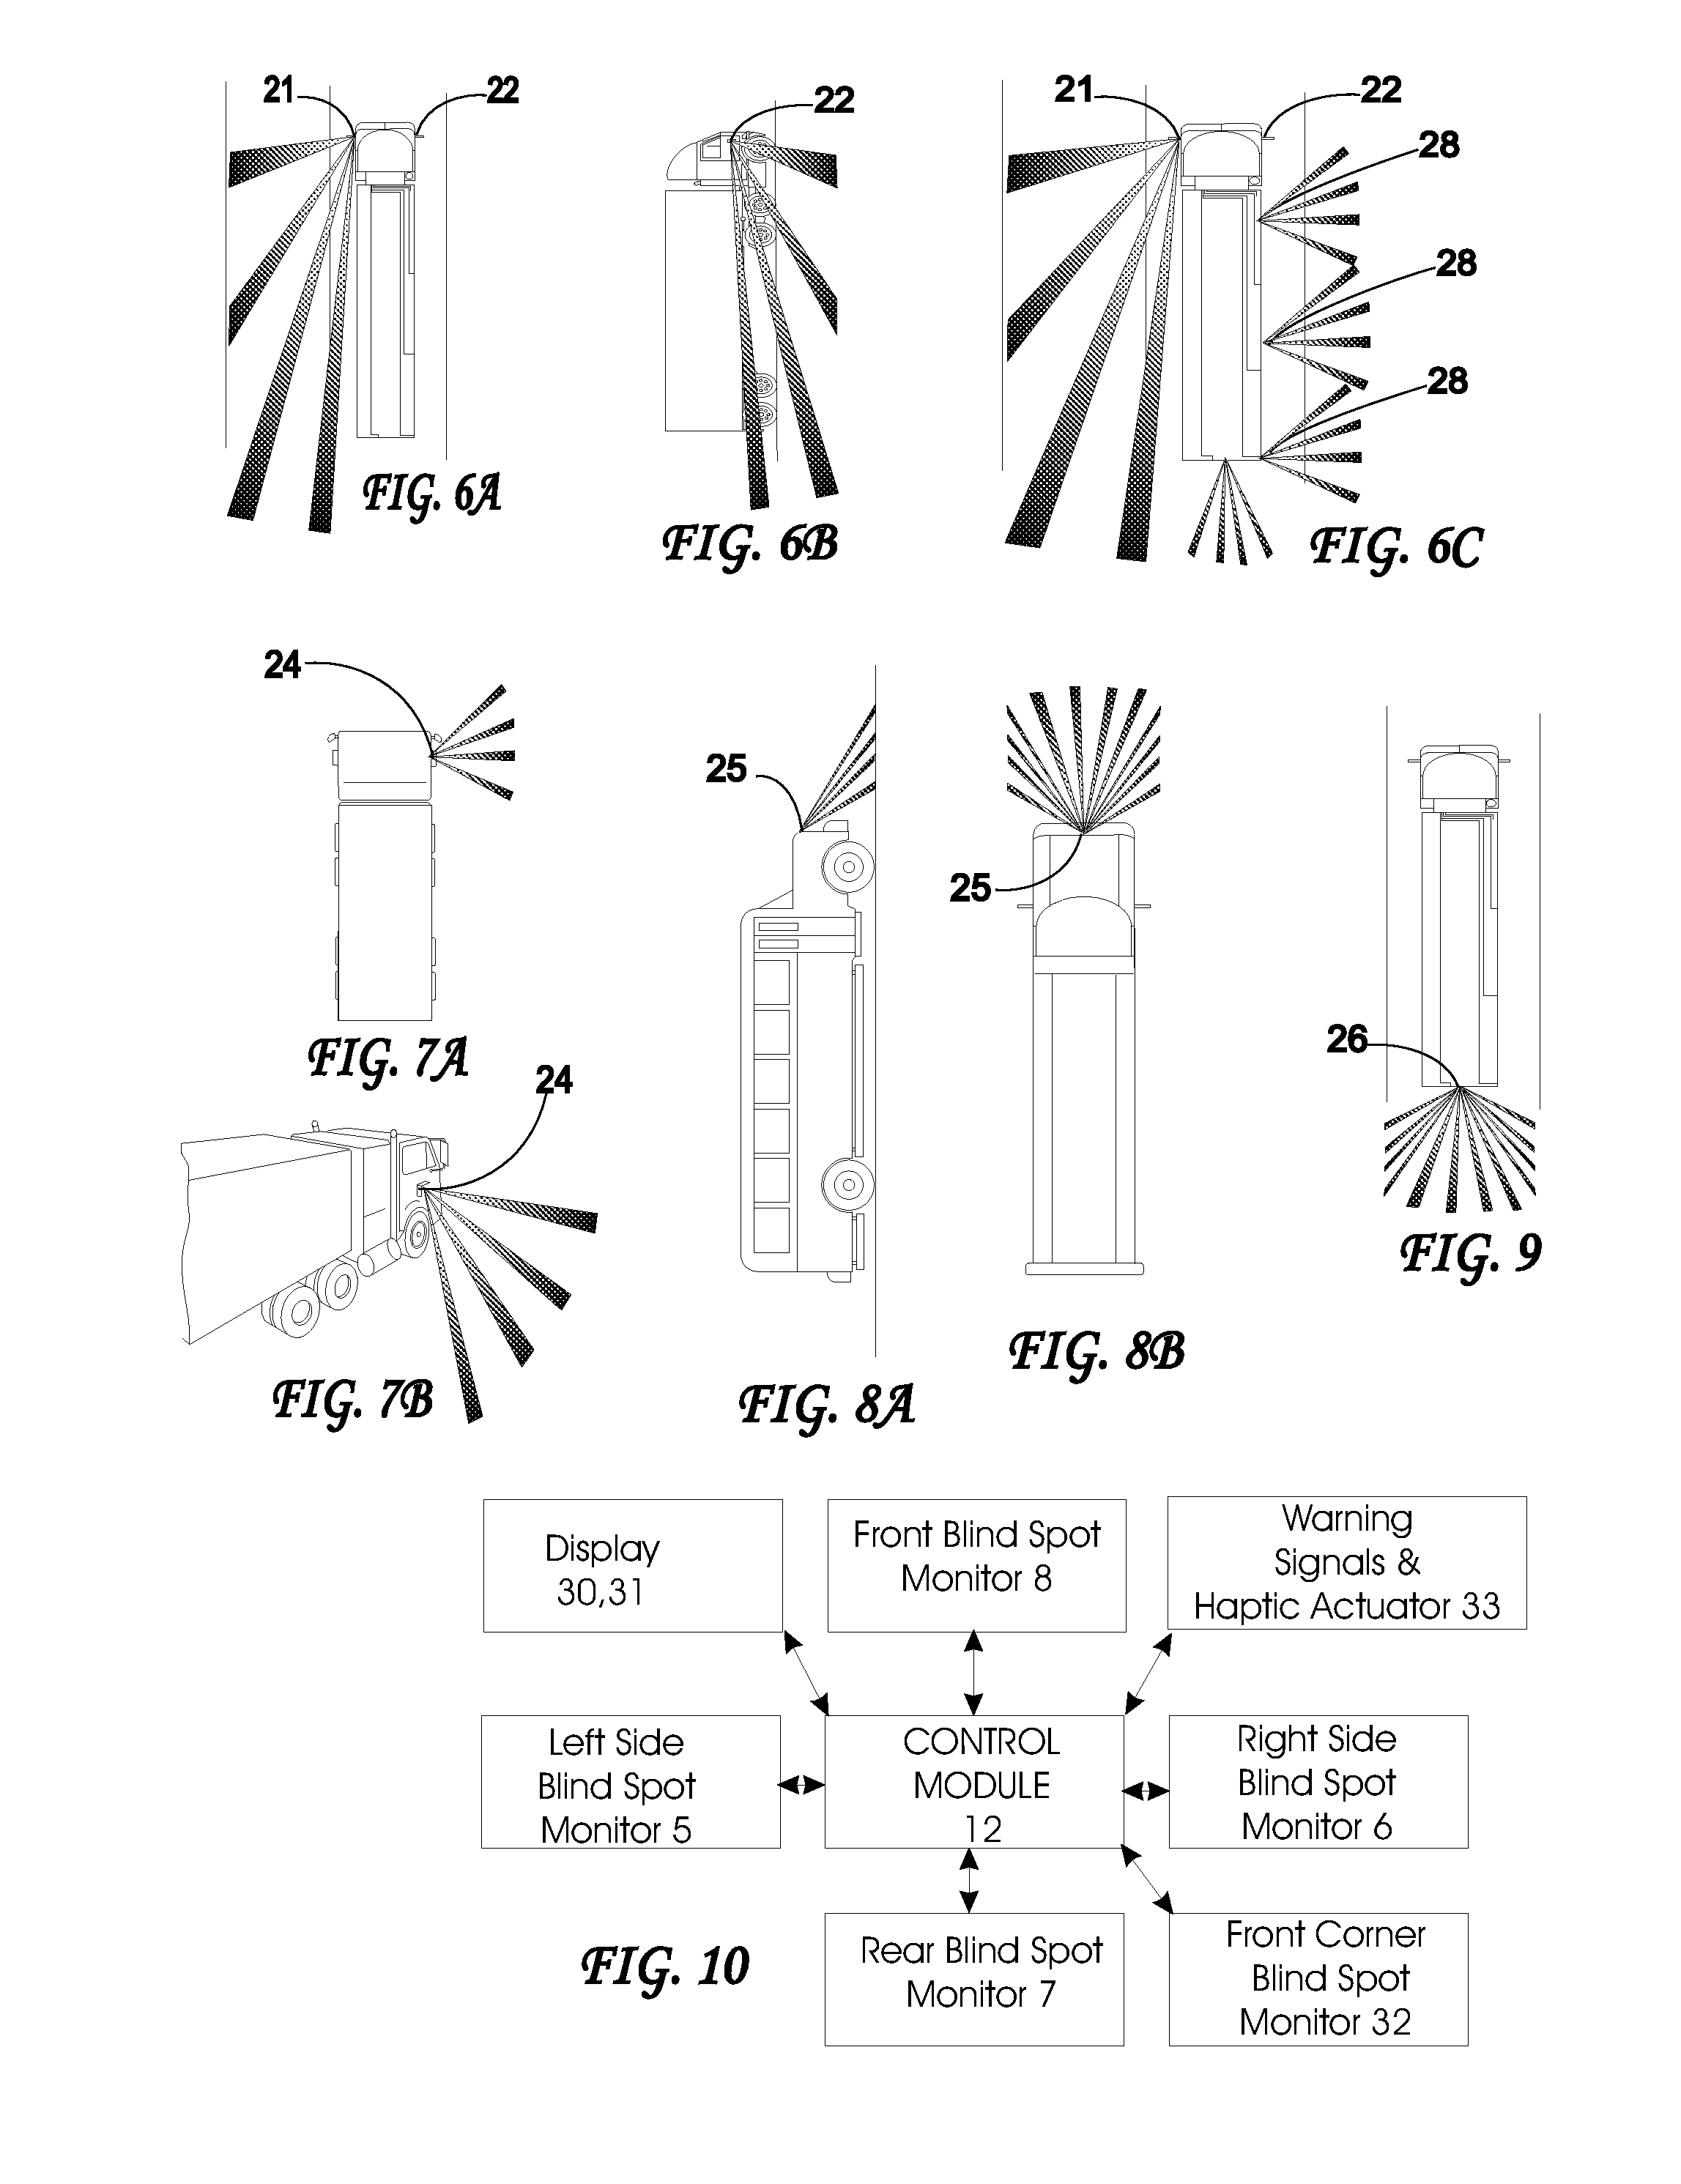 System and Method for Detecting and Protecting Pedestrians